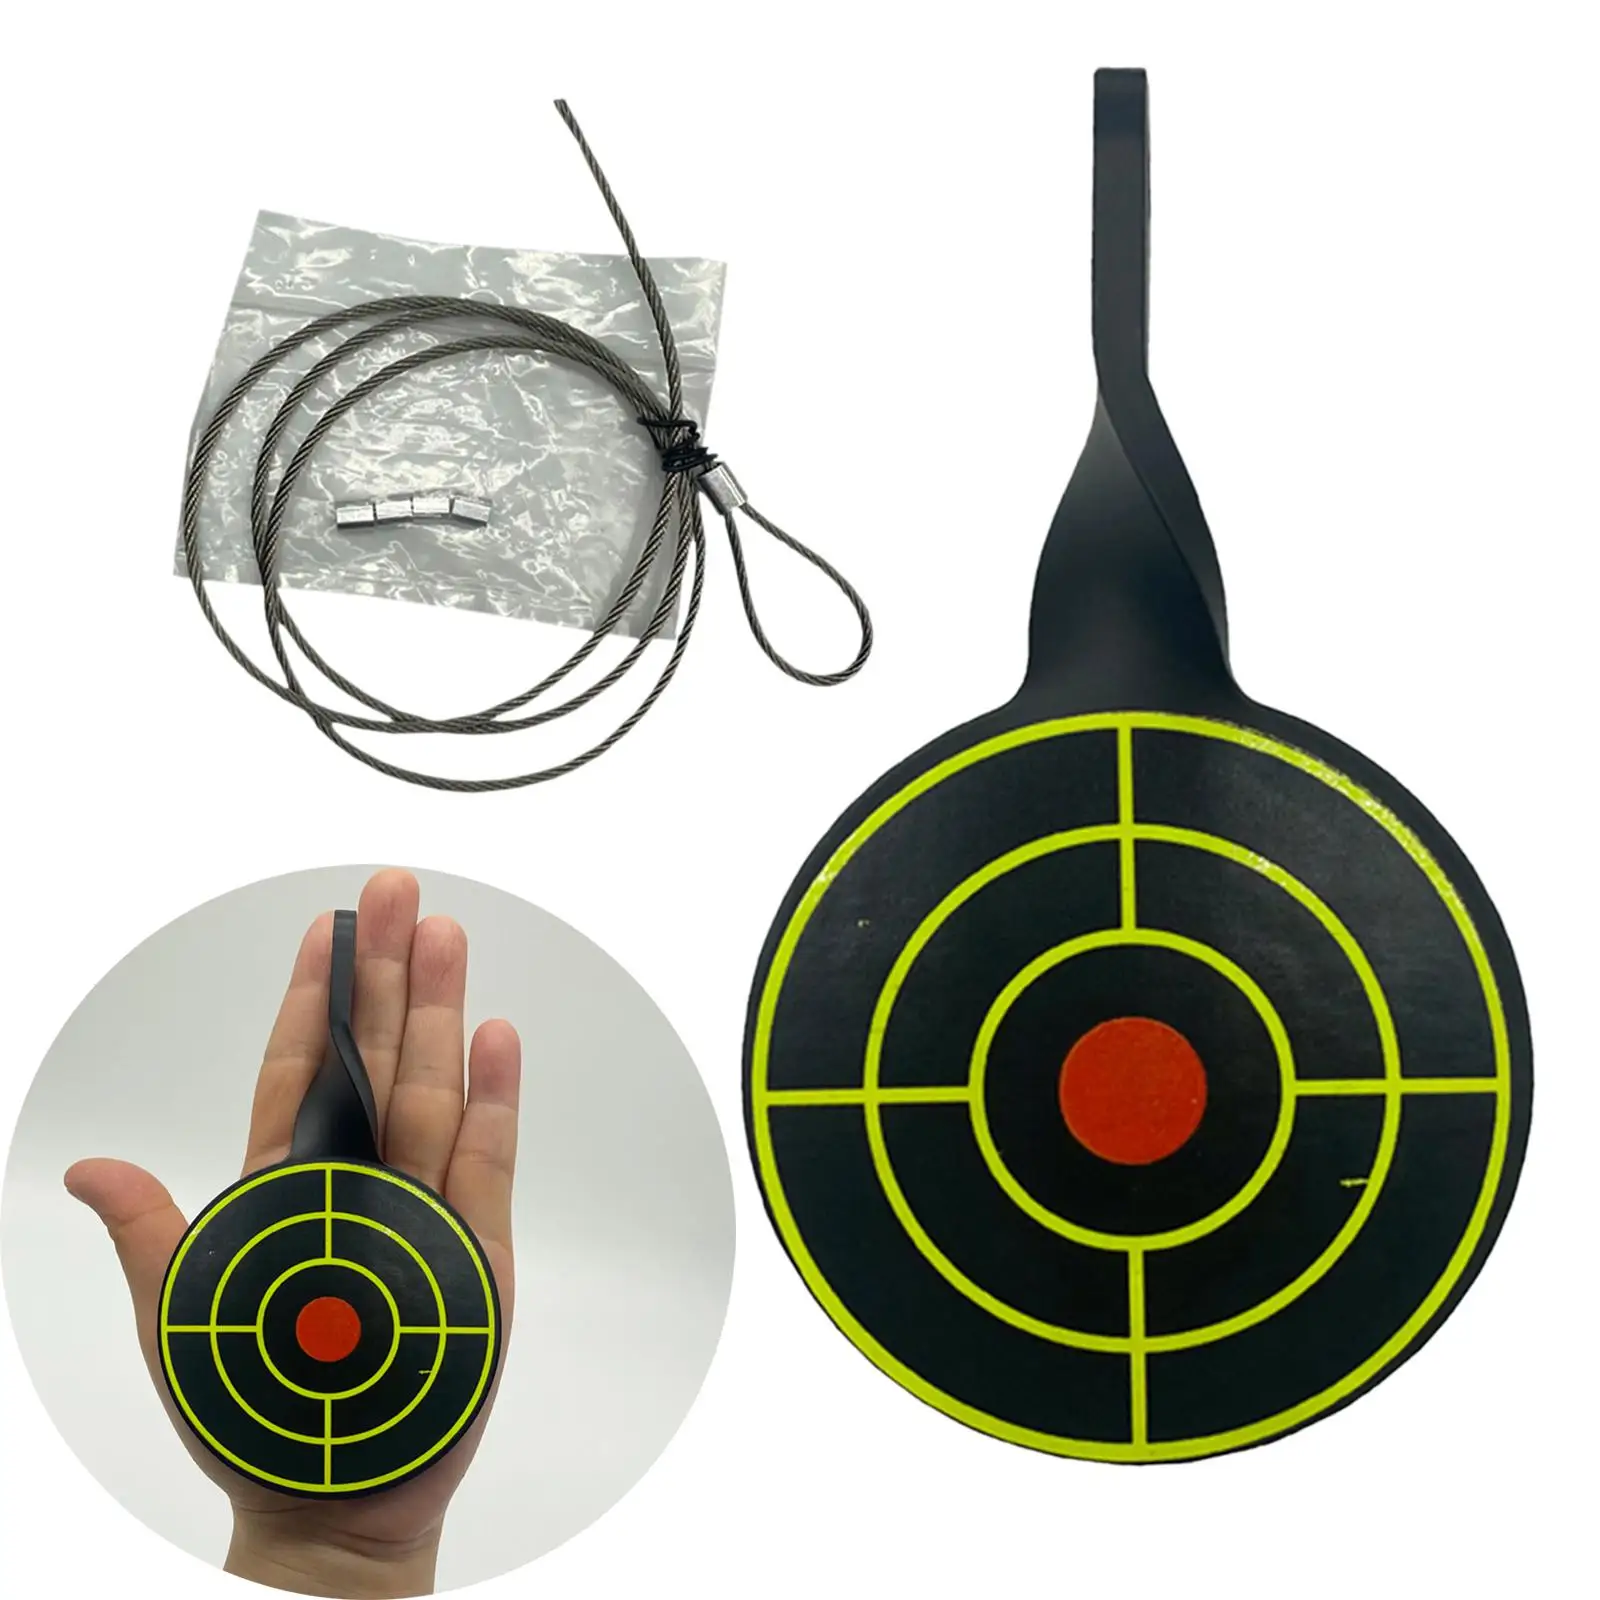 Diameter 8cm Shooting Target Stainless Steel Targets Hunting Catapult Paintball Archery Bow Training Target Hunting Tool Accs